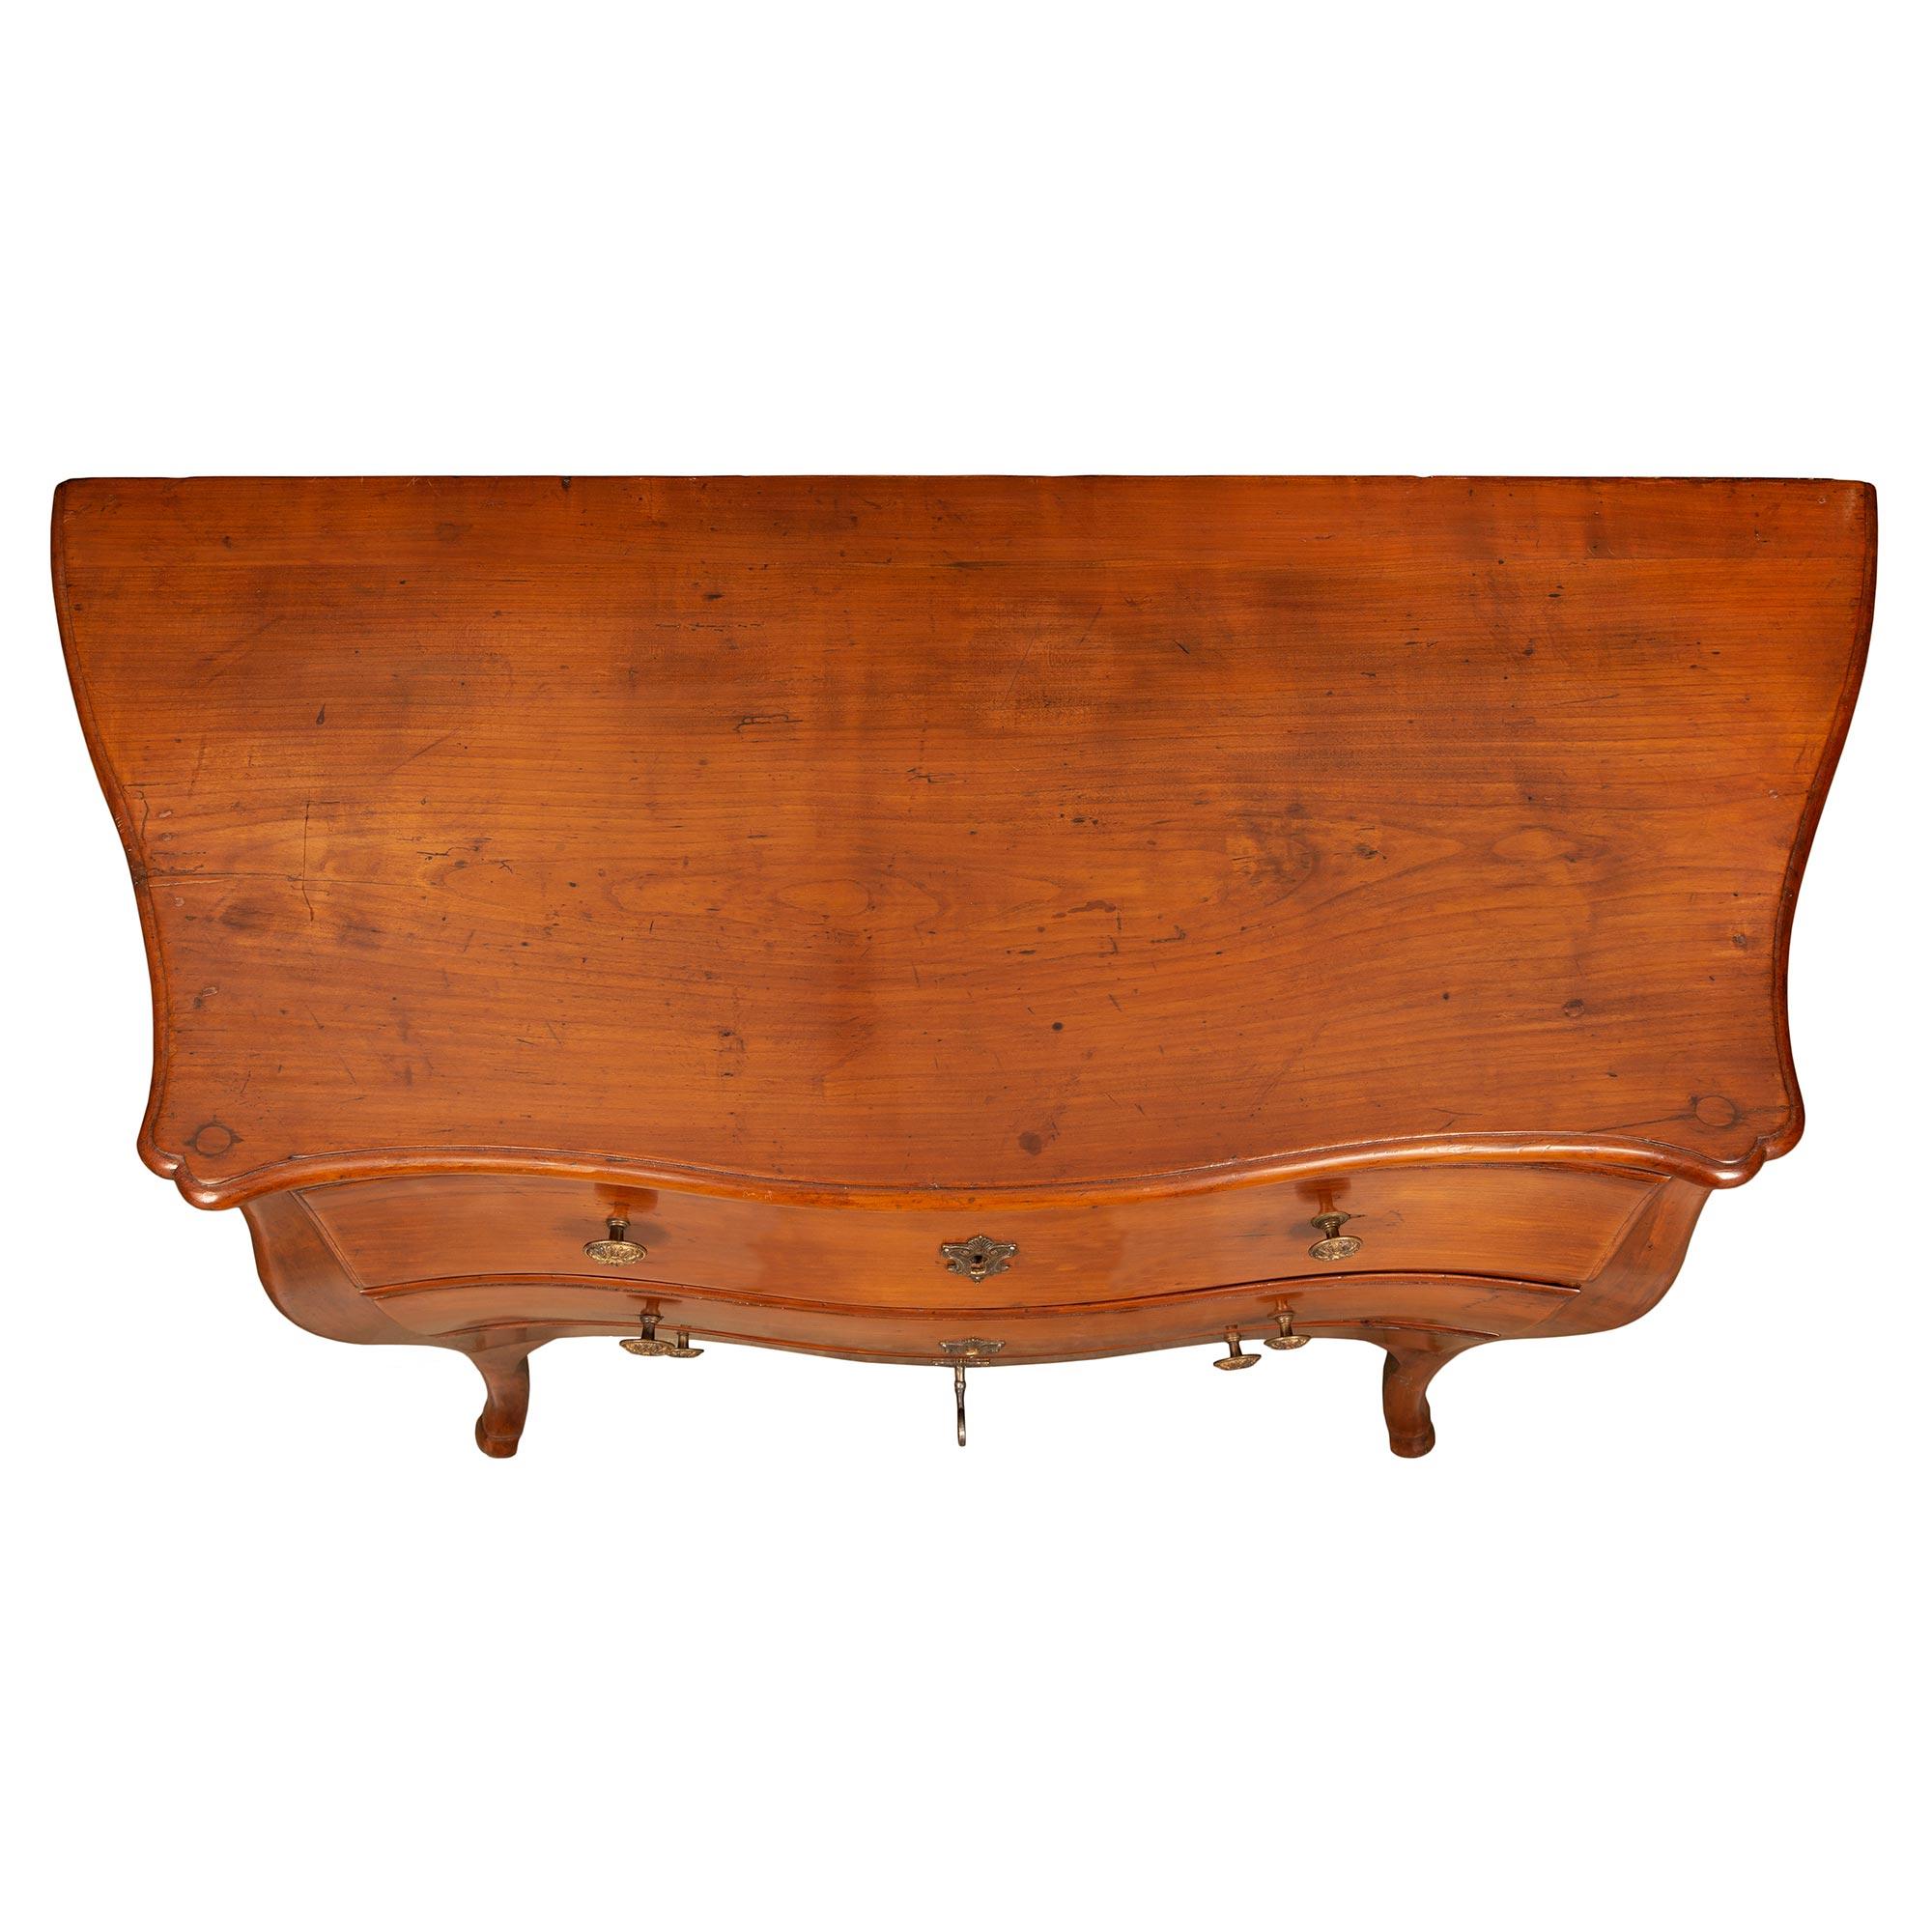 A most handsome French 18th century Louis XV period walnut petite commode Bordelaise. The chest is raised by elegant cabriole legs with carved hoof feet. Above the fine scalloped shaped frieze are three drawers. Each with a lovely bombee shape,